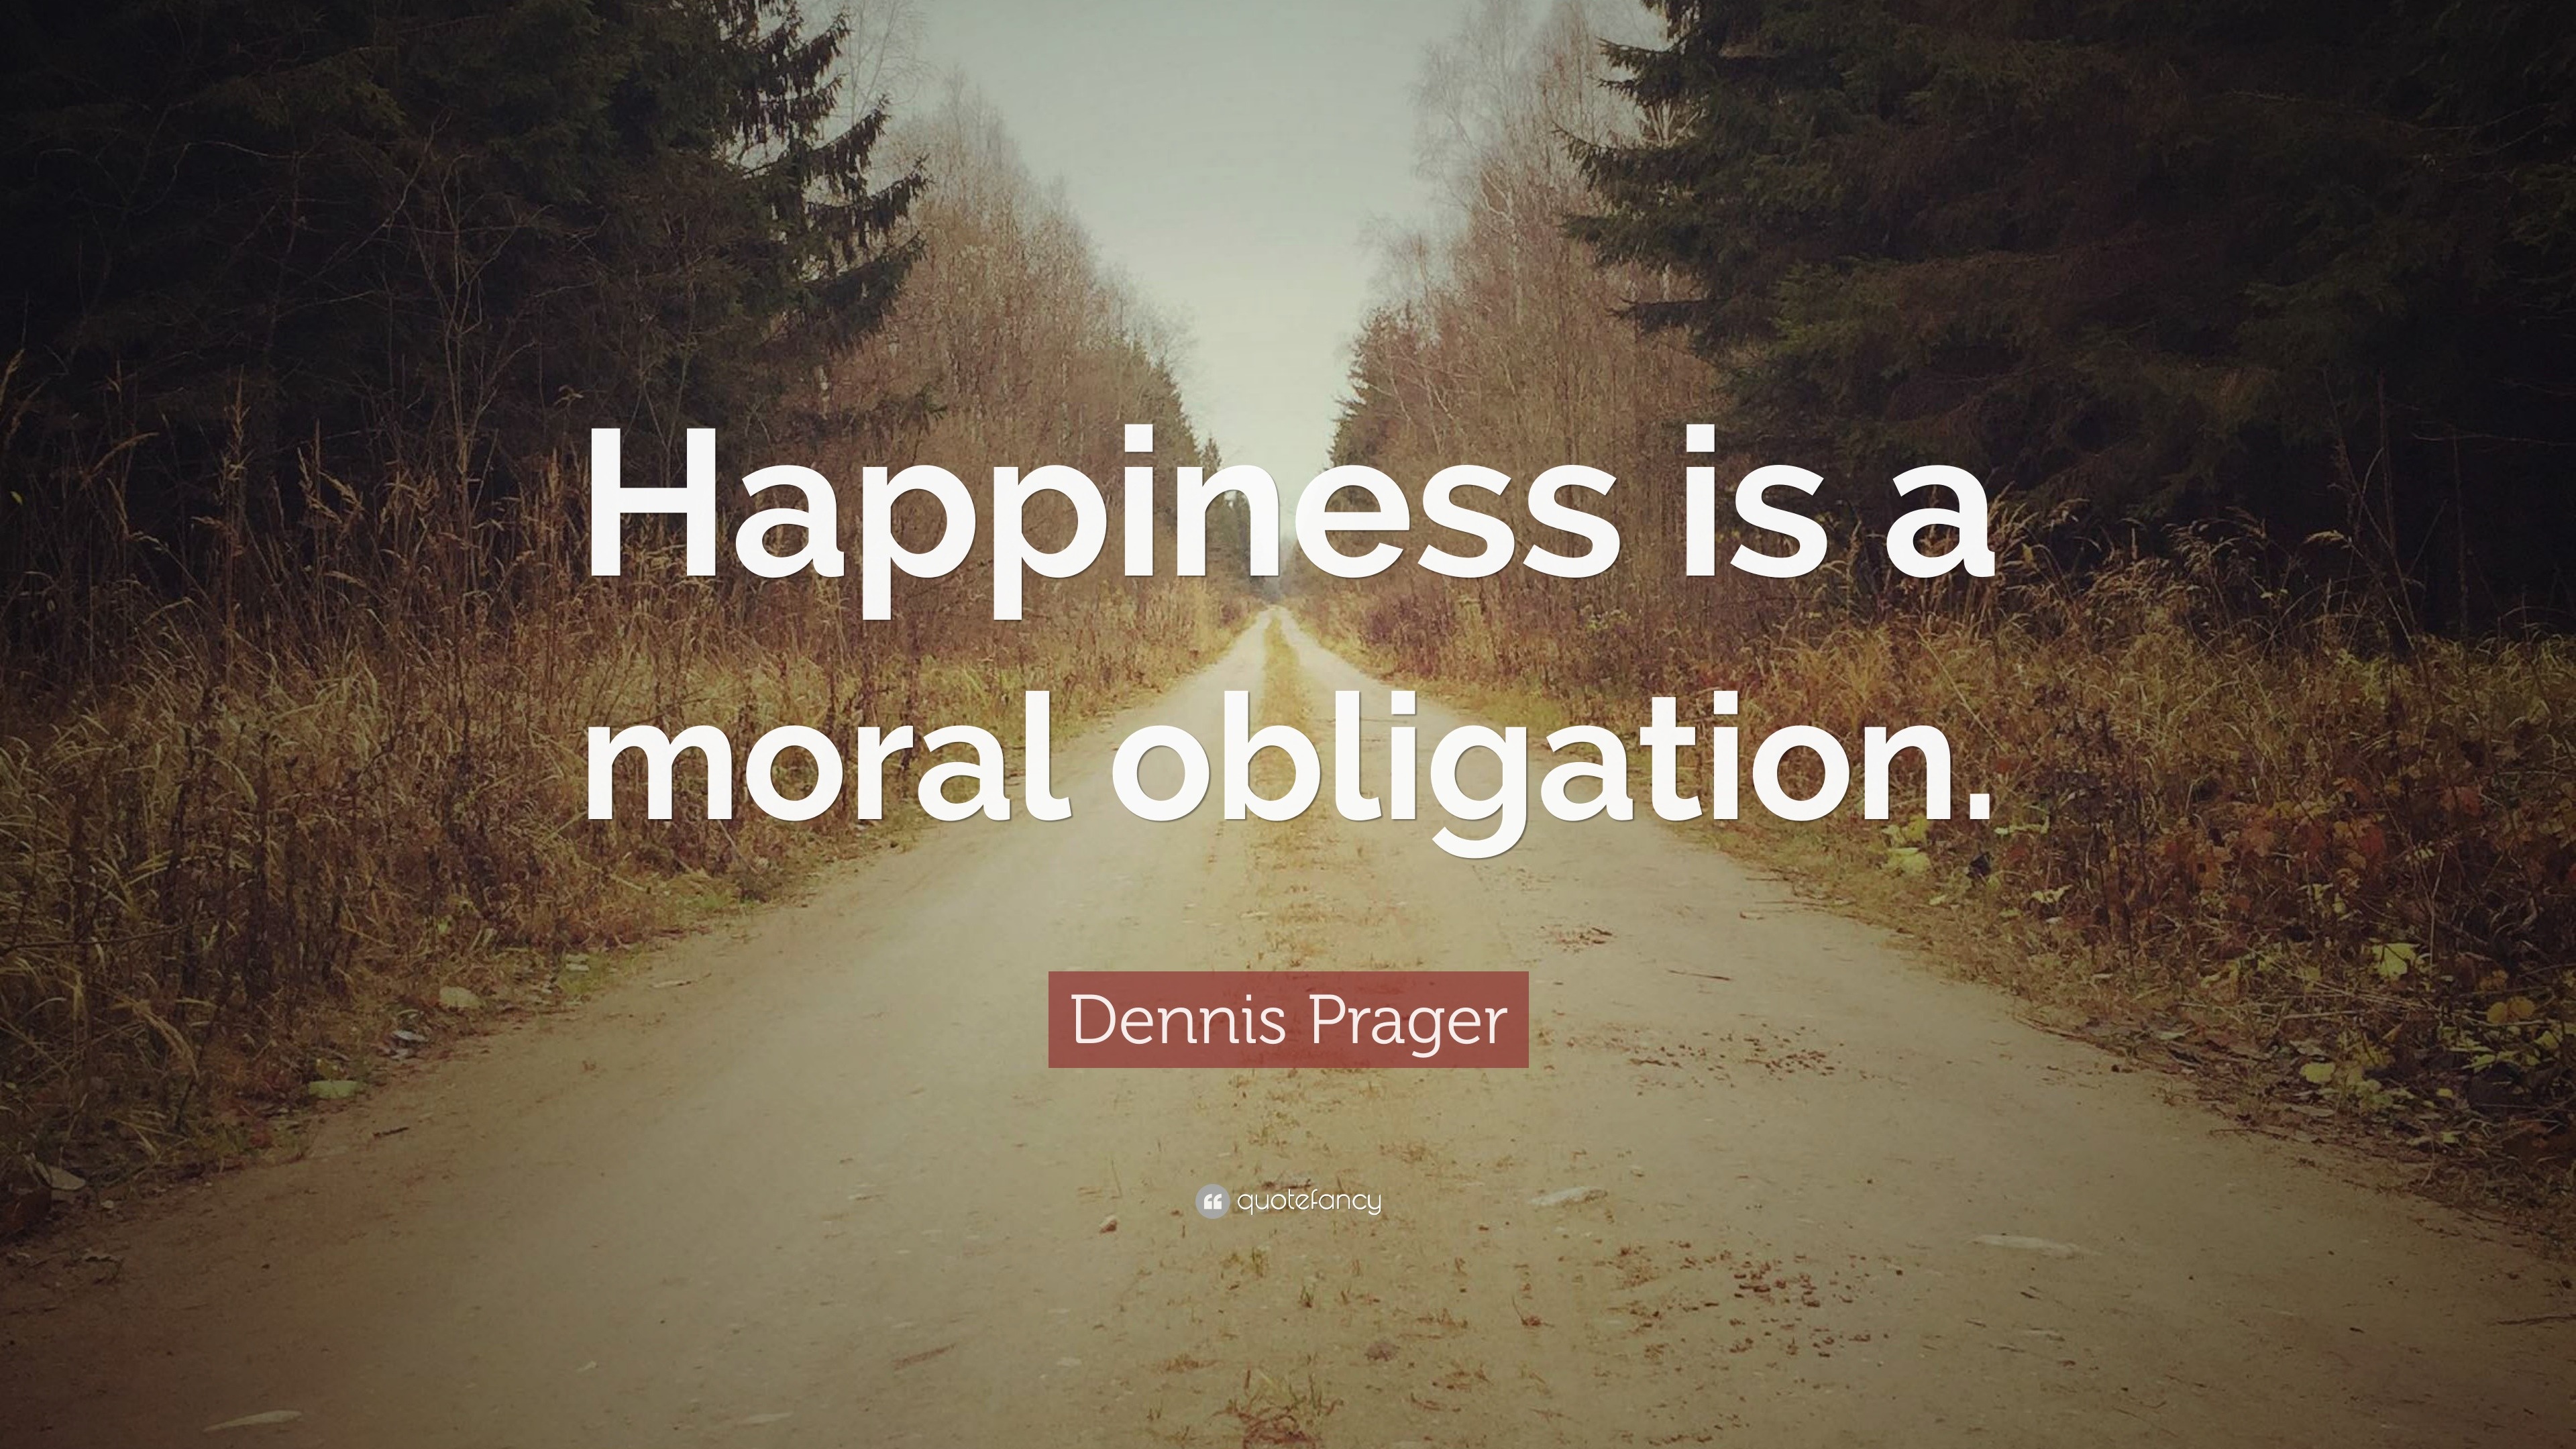 Dennis Prager Quote: “Happiness is a moral obligation.”